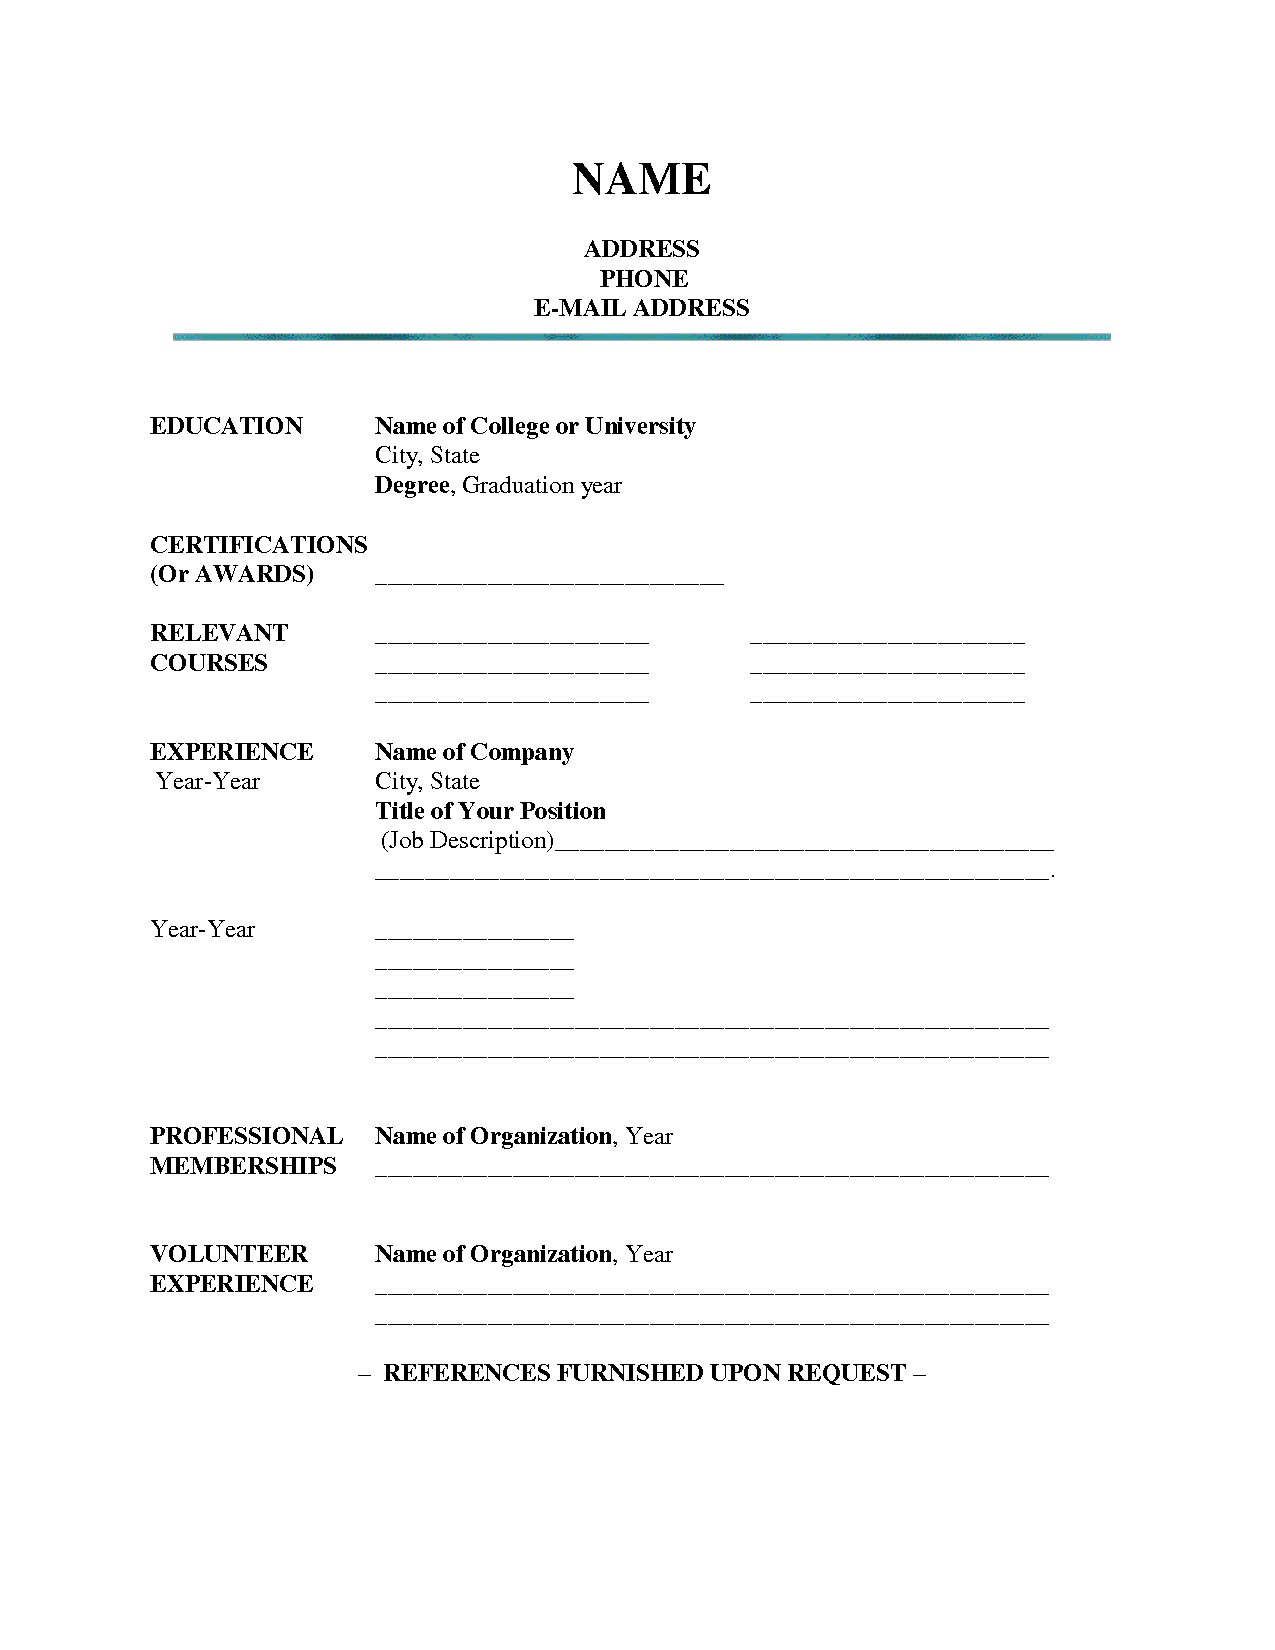 Blank Resume Templates For Microsoft Word – Calep.midnightpig.co In Blank Resume Templates For Microsoft Word